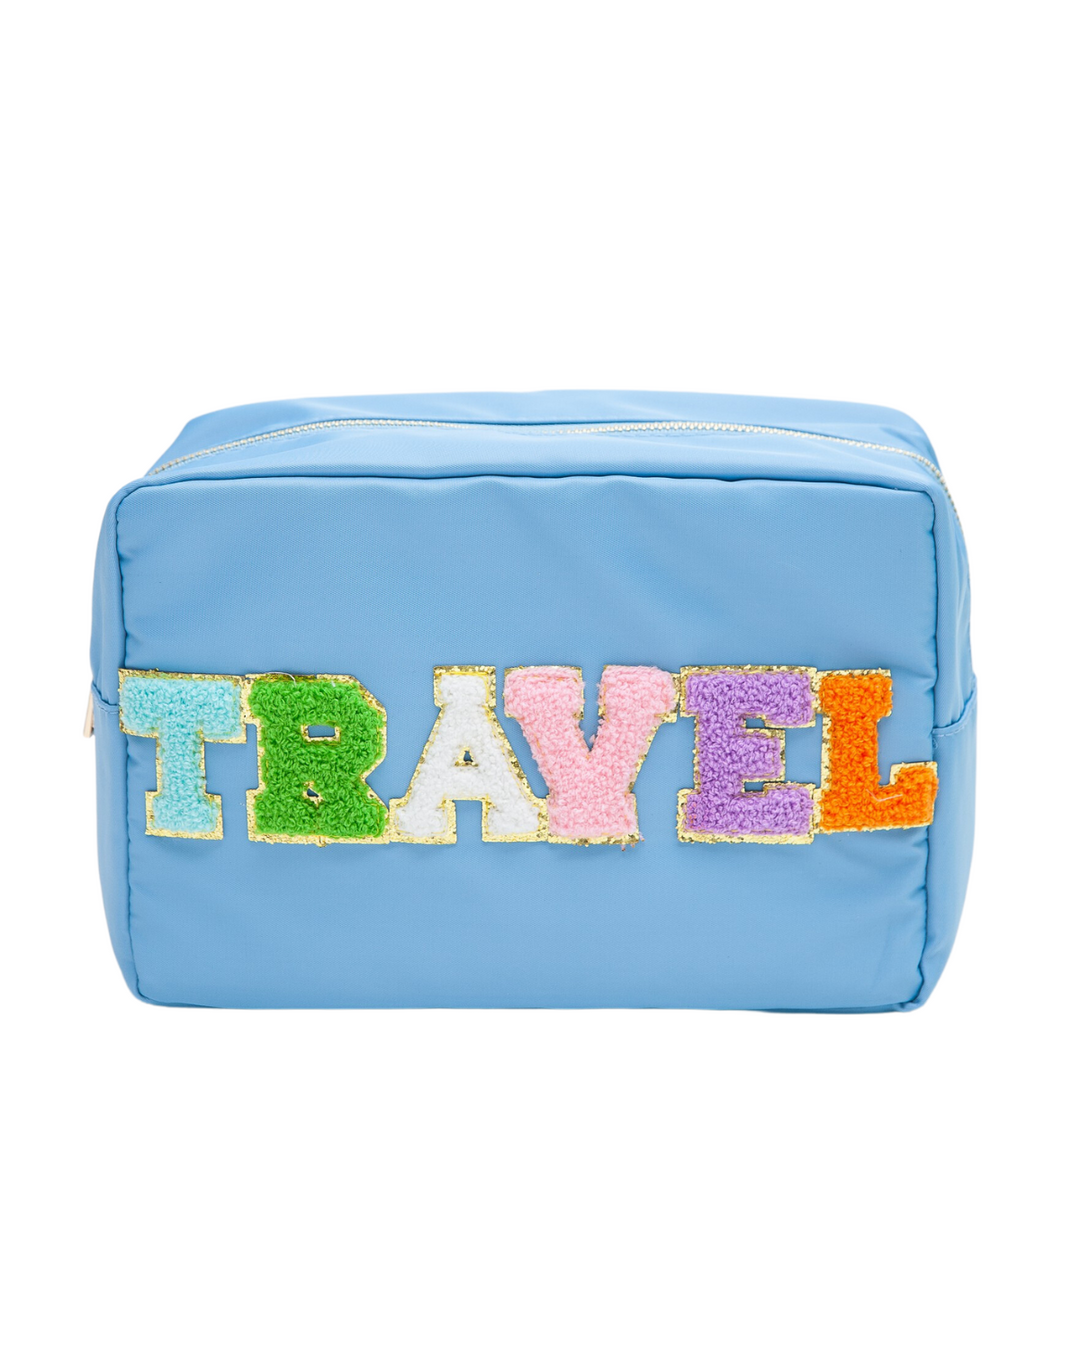 CLASSIC LARGE TRAVEL MAKEUP POUCH